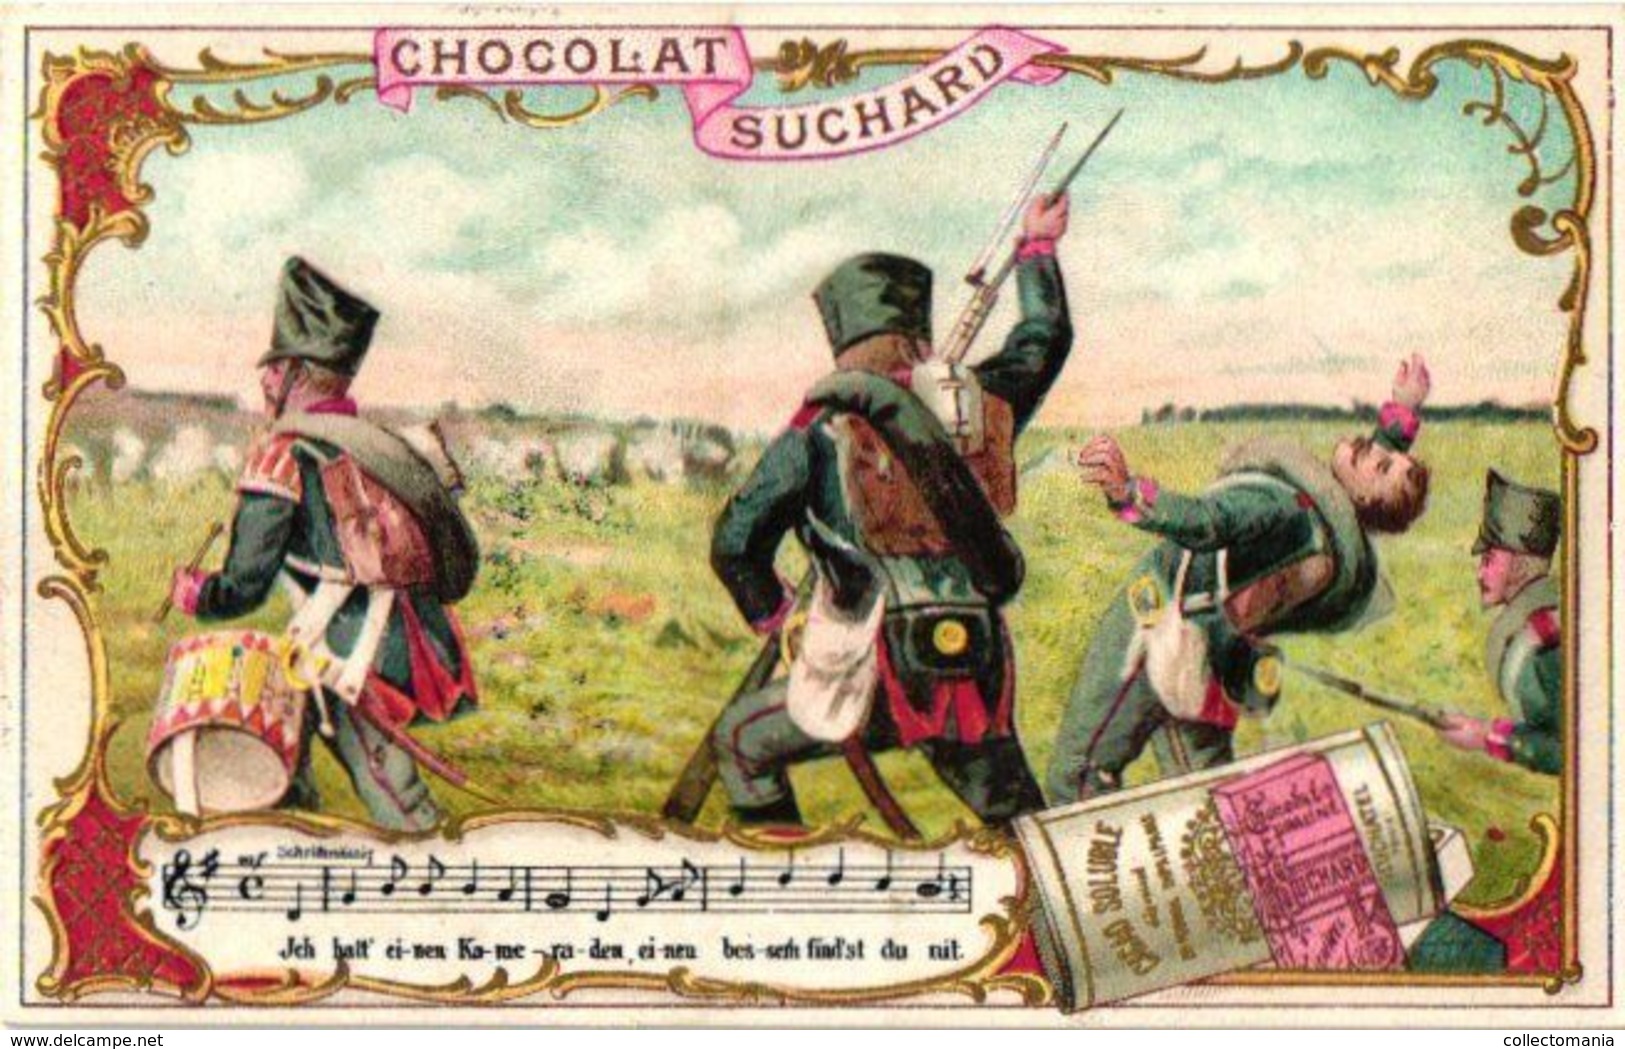 6 chromo litho colors trade cards Swiss chocolate advertising SUCHARD set 51B  c1896 Folksongs music